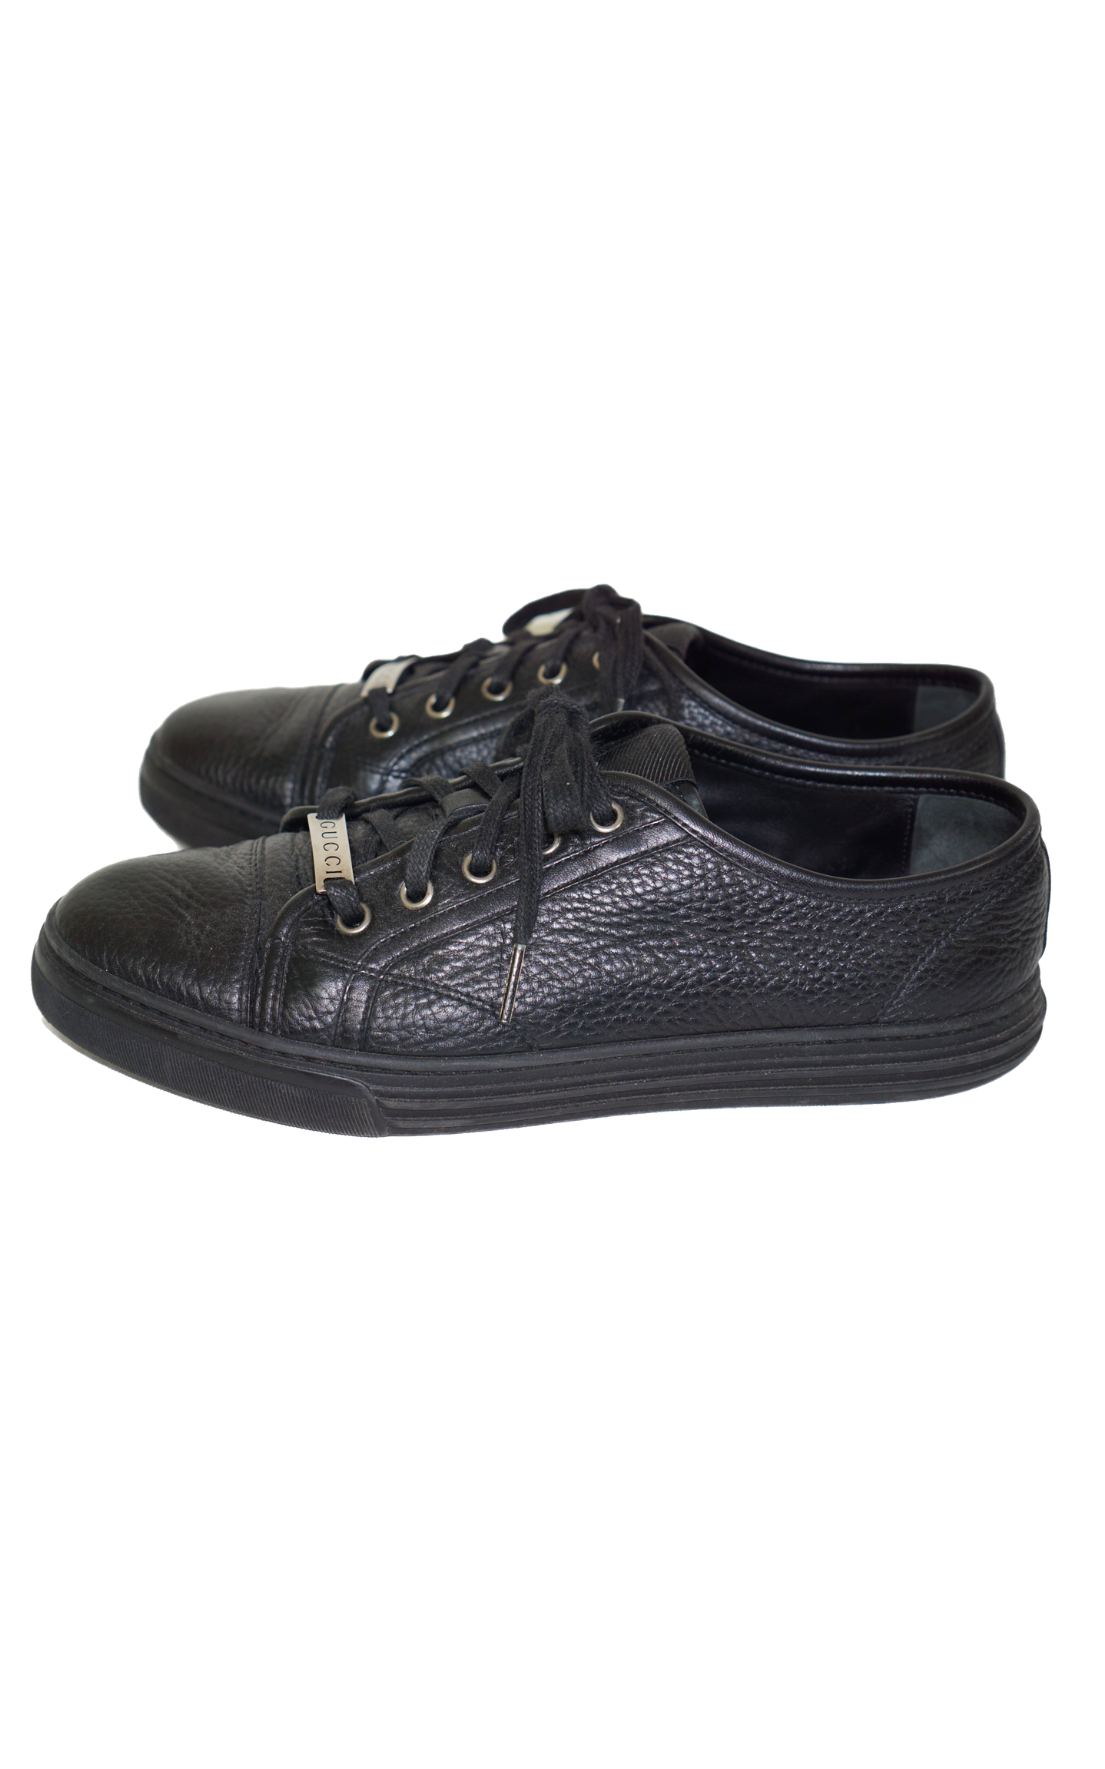 GUCCI Logo Black Leather Low Top Lace Up Sneakers resellum